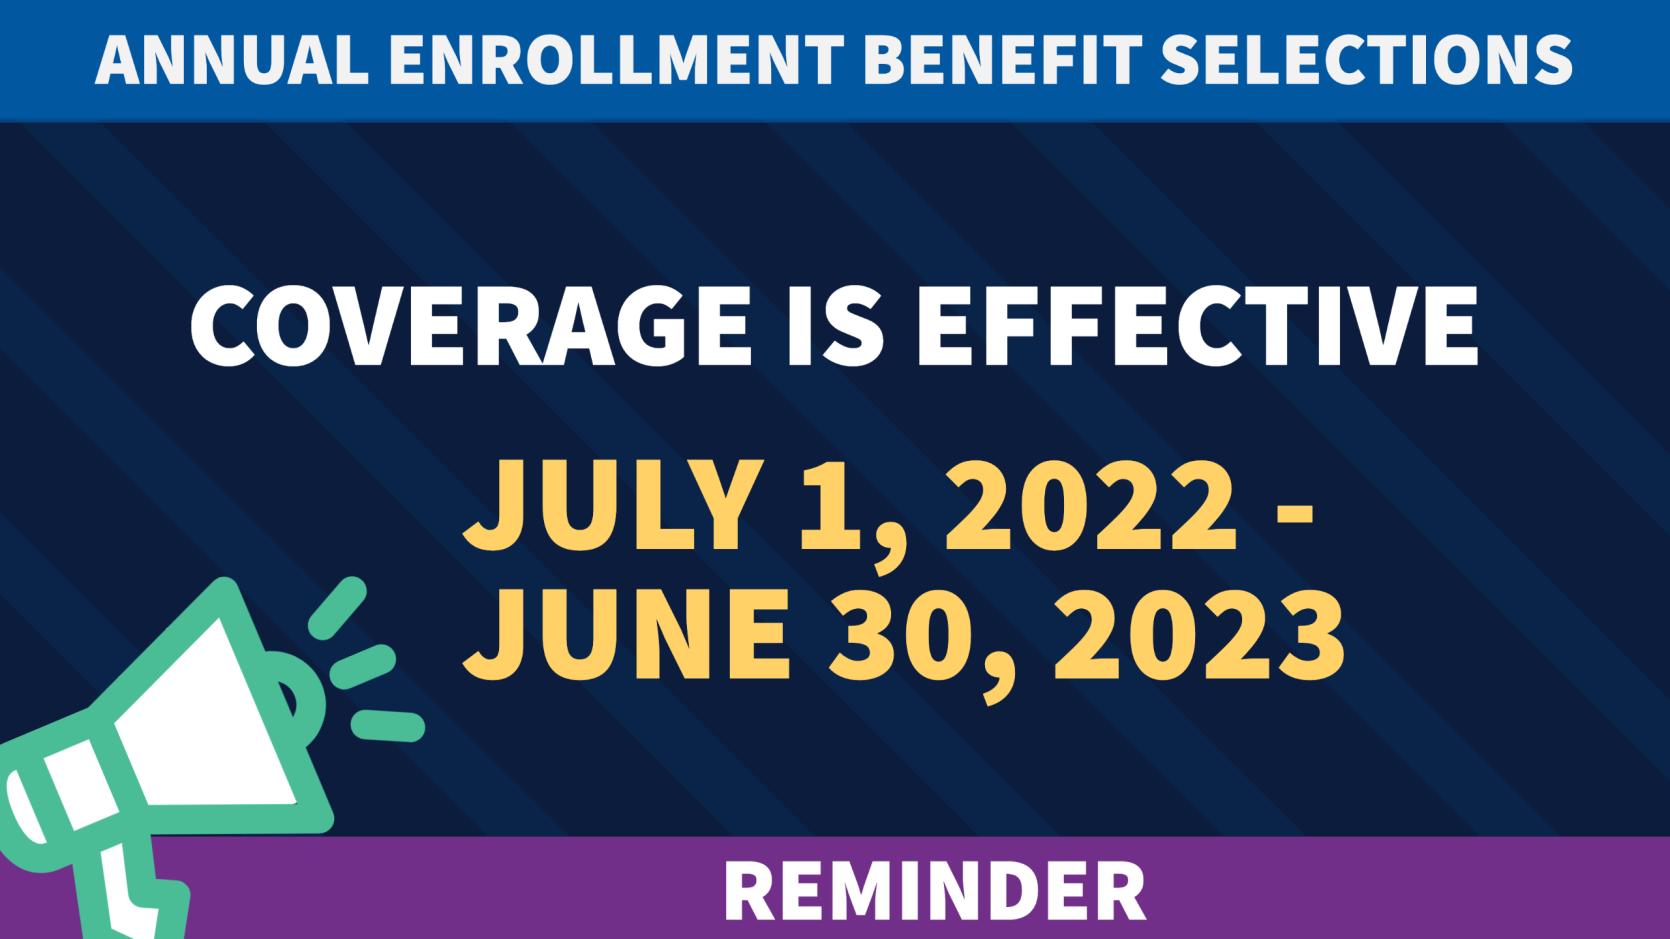 2022 Annual Enrollment selections are now active for benefit coverage effective July 1, 2022 - June 30, 2023.